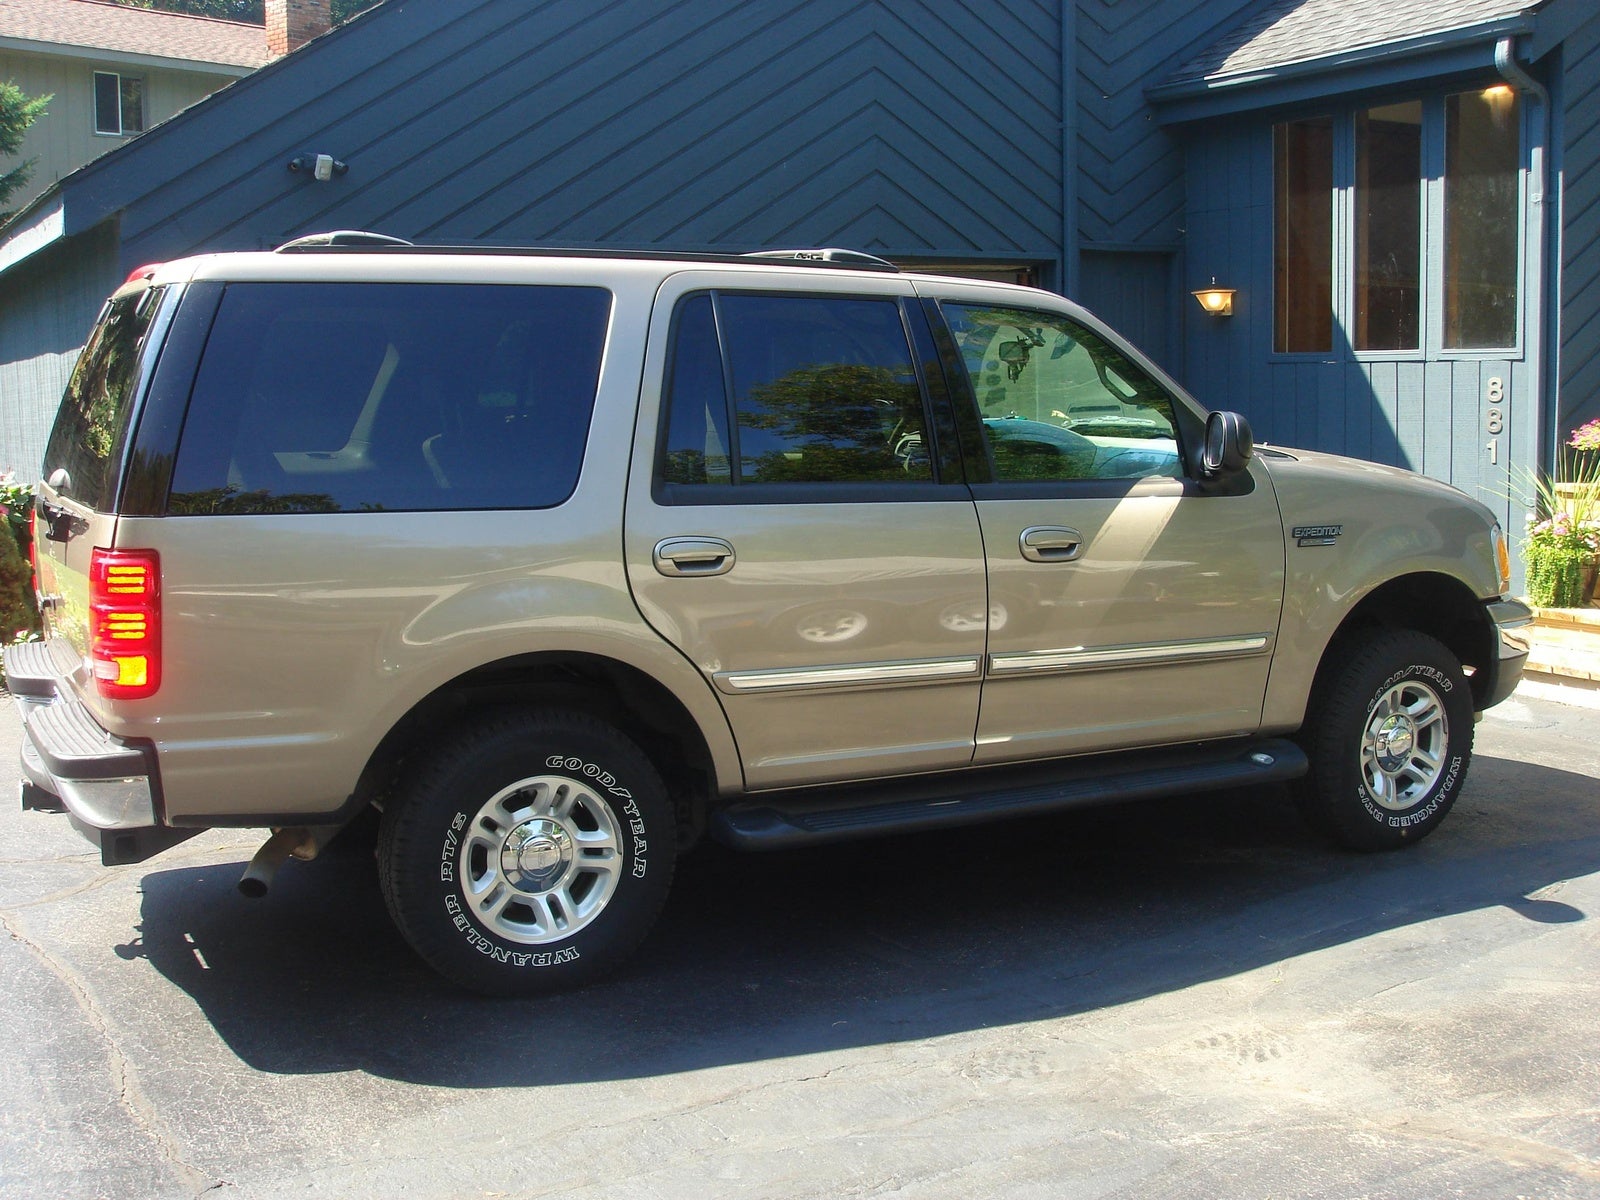 2001 Ford excursion manual download #2